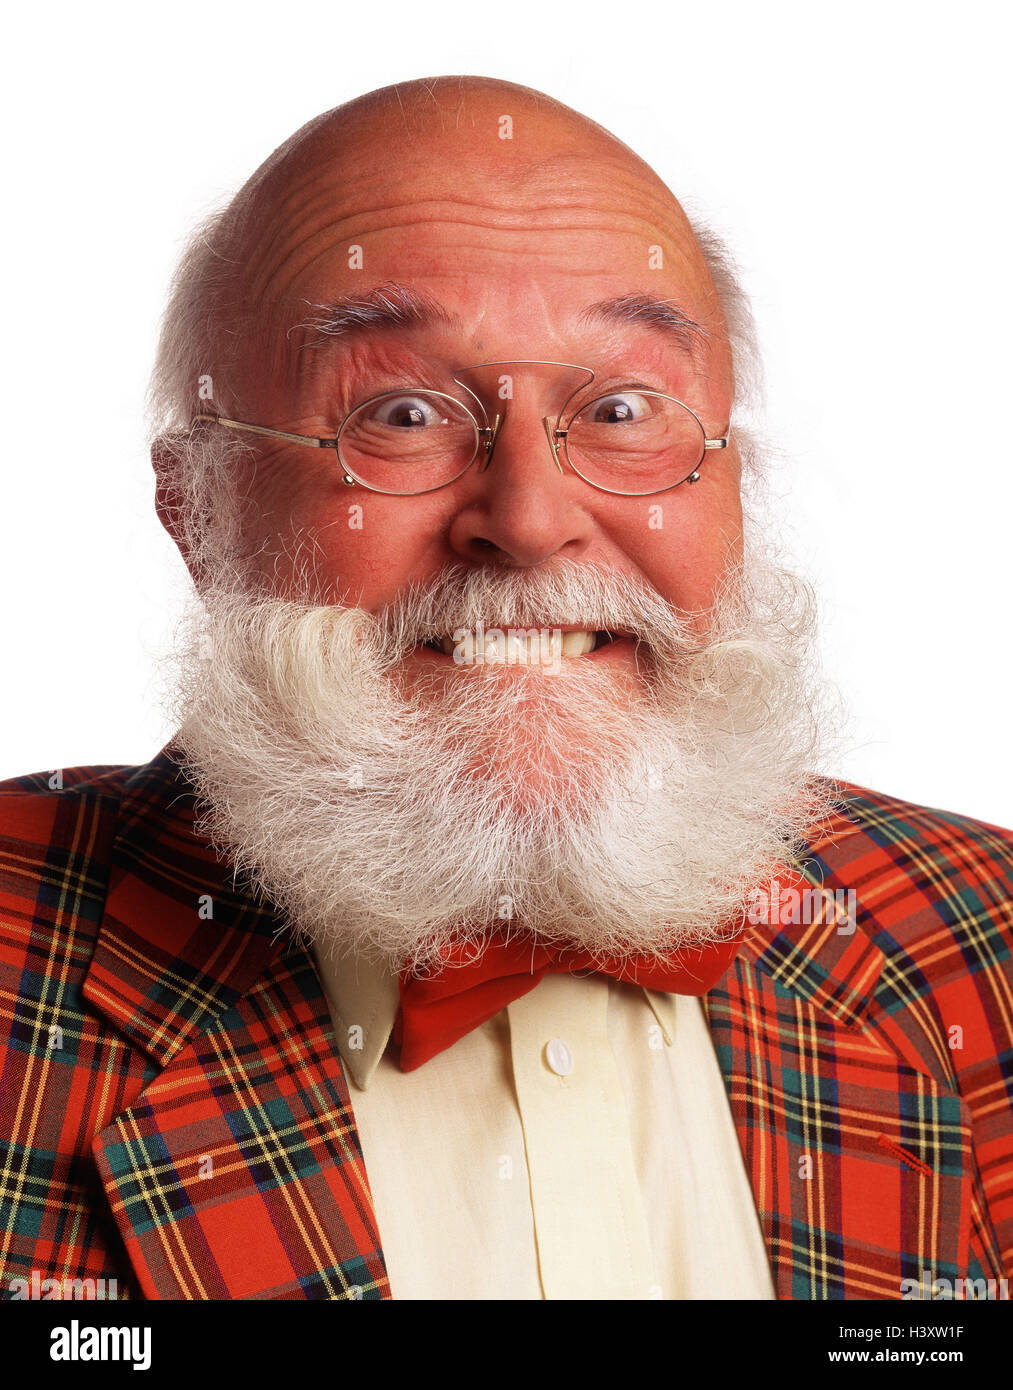 Senior, bald head, jacket, checked, glasses, beard, laugh, joy, portrait, Senior, inside, man, old, full beard, white, bulkheads, jacket, sports jacket, Scot's samples, square, red, glad, happy, cheerfully, in a good mood, mischievously, studio, near, cut out, Stock Photo